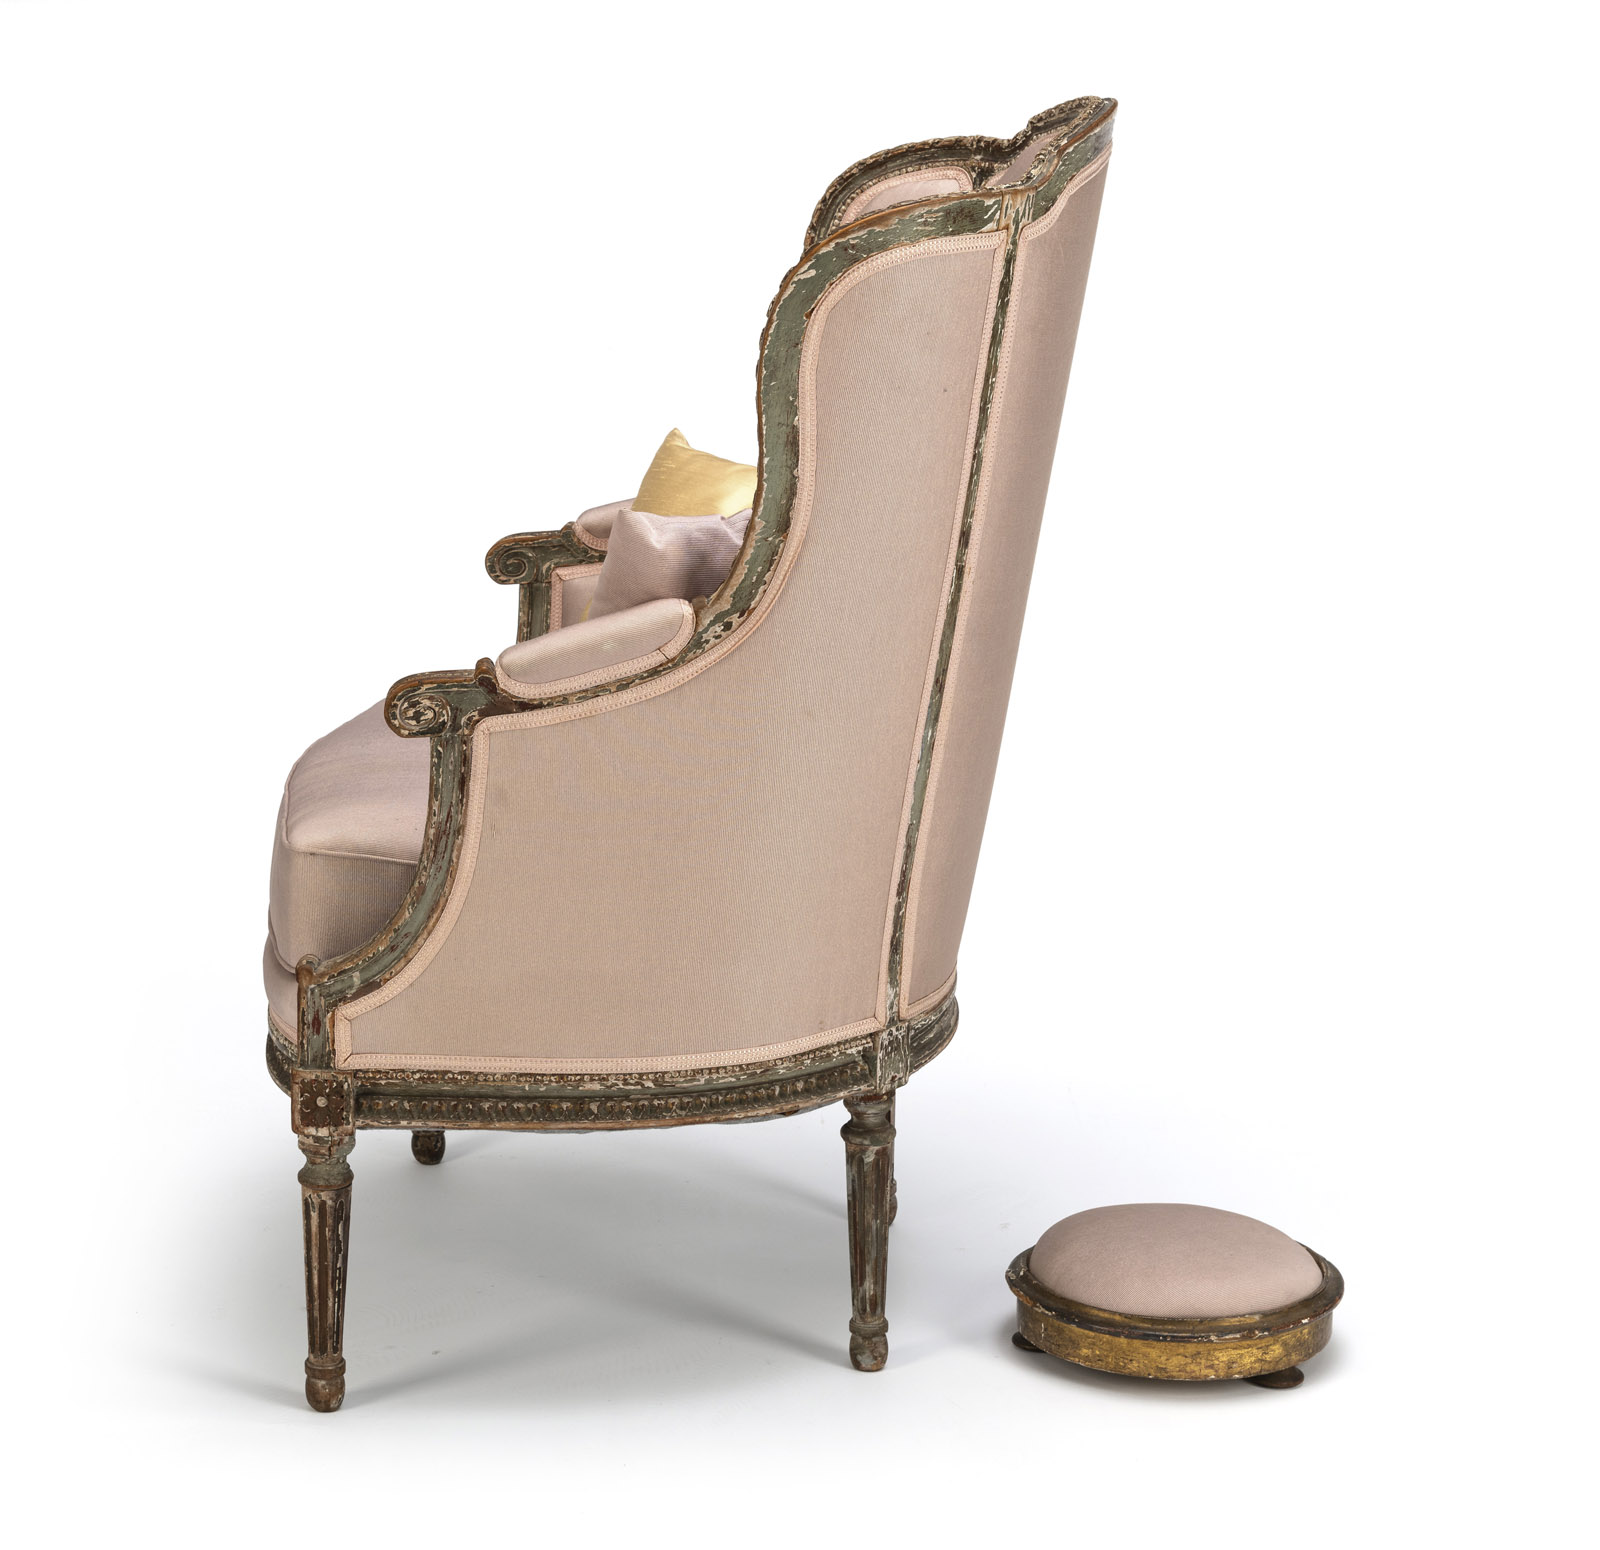 A LOUIS XVI STYLE POLYCHROME AND PARCEL- GILT PAINTED FAUTEUIL - Image 5 of 5